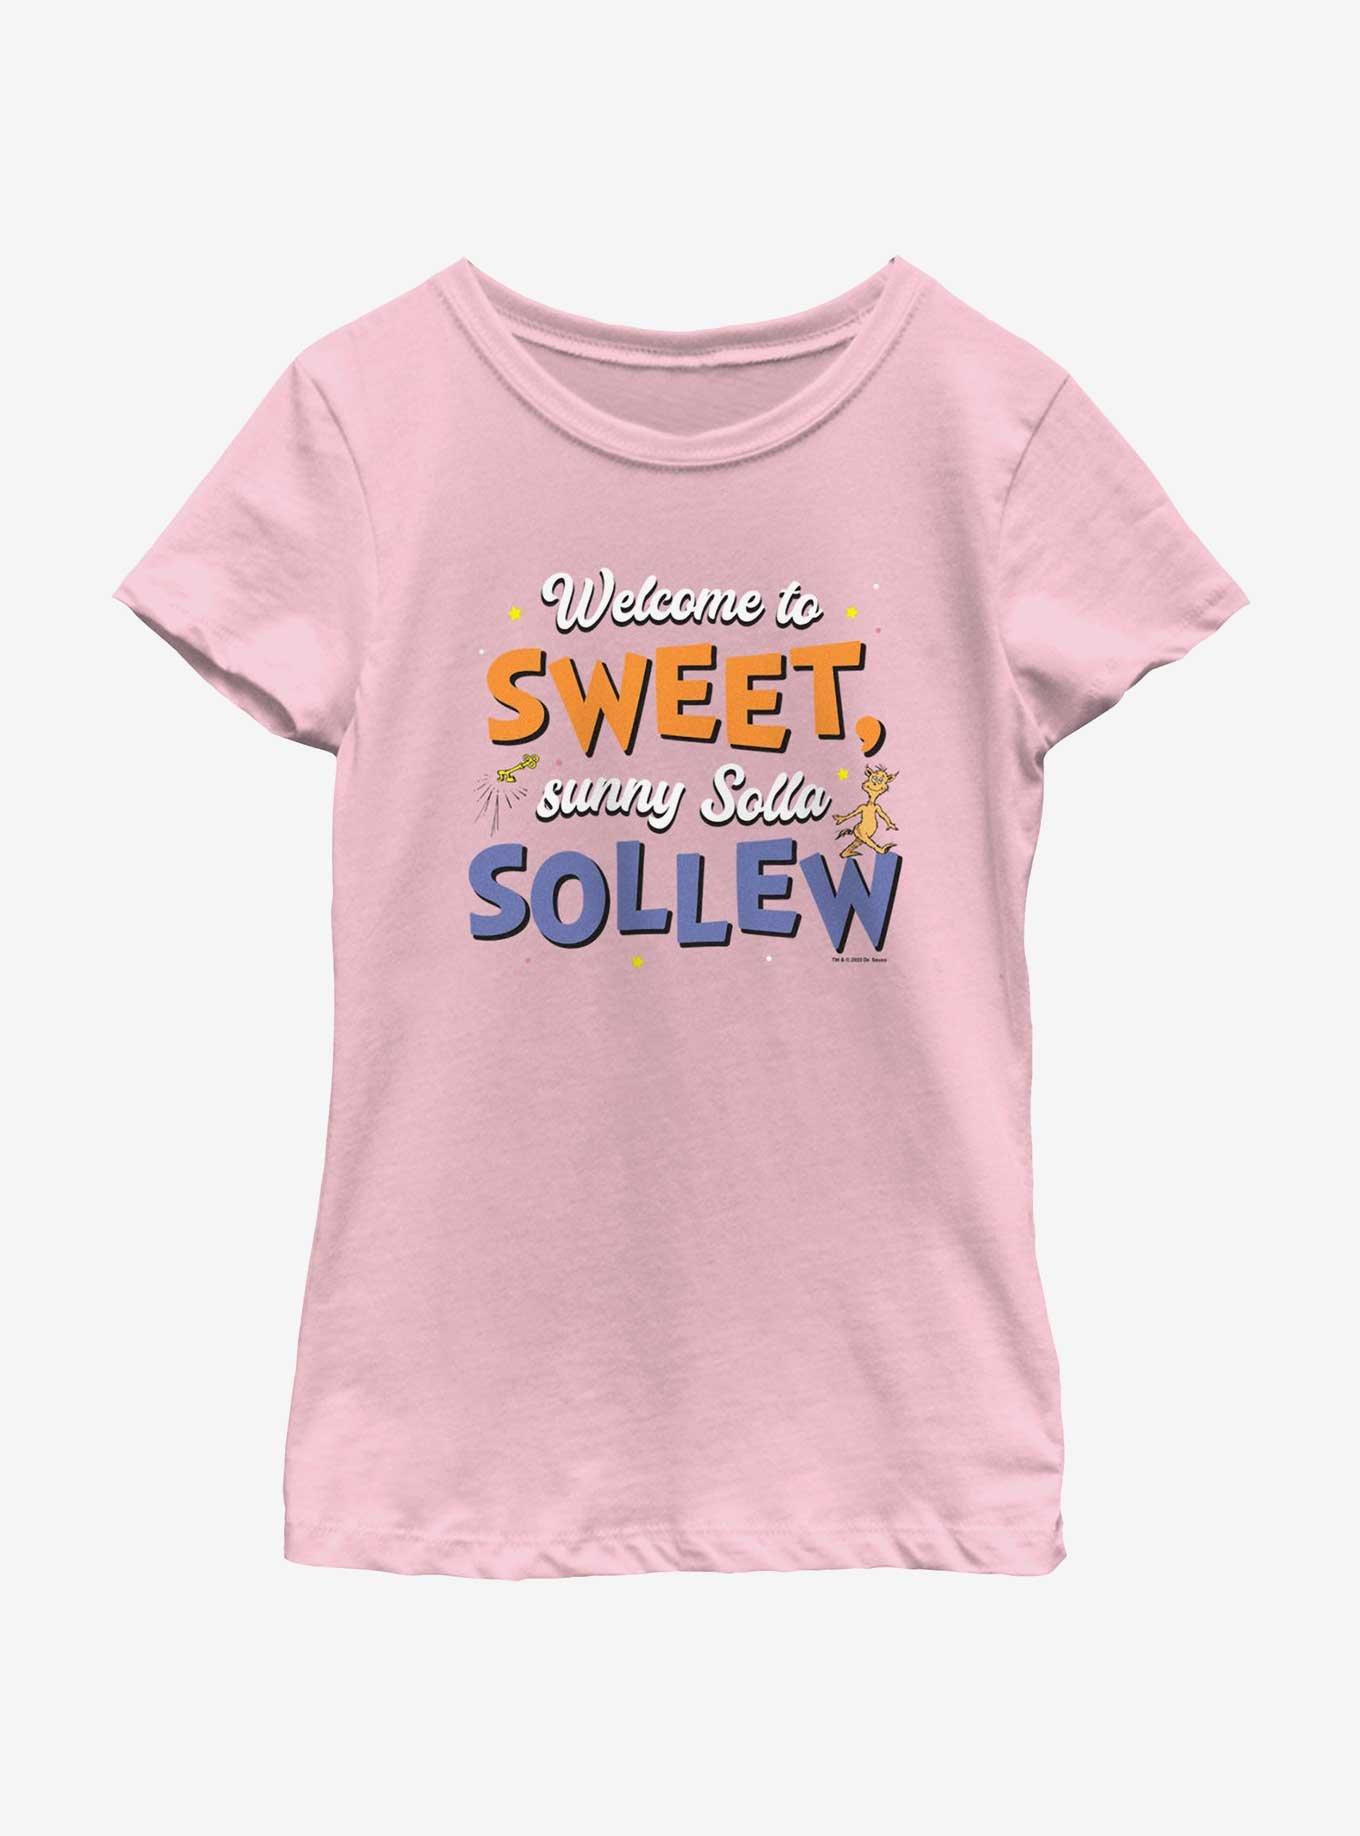 Dr. Seuss's I Had Trouble Getting Into Solla Sollew Welcome To Sweet Sunny Solla Sollew Youth Girls T-Shirt, PINK, hi-res